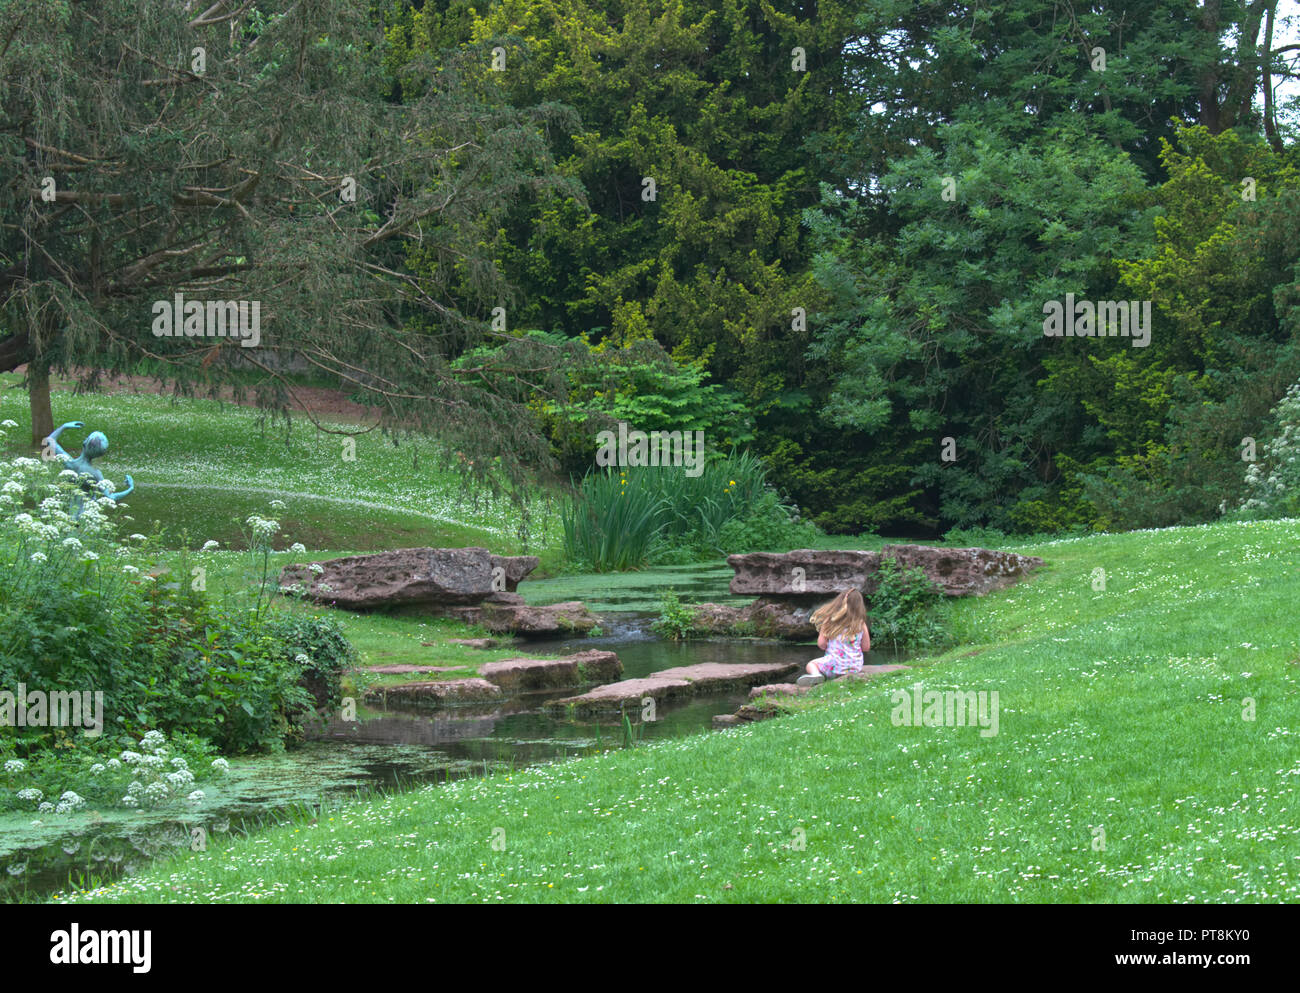 Little girl playing in a country garden Stock Photo